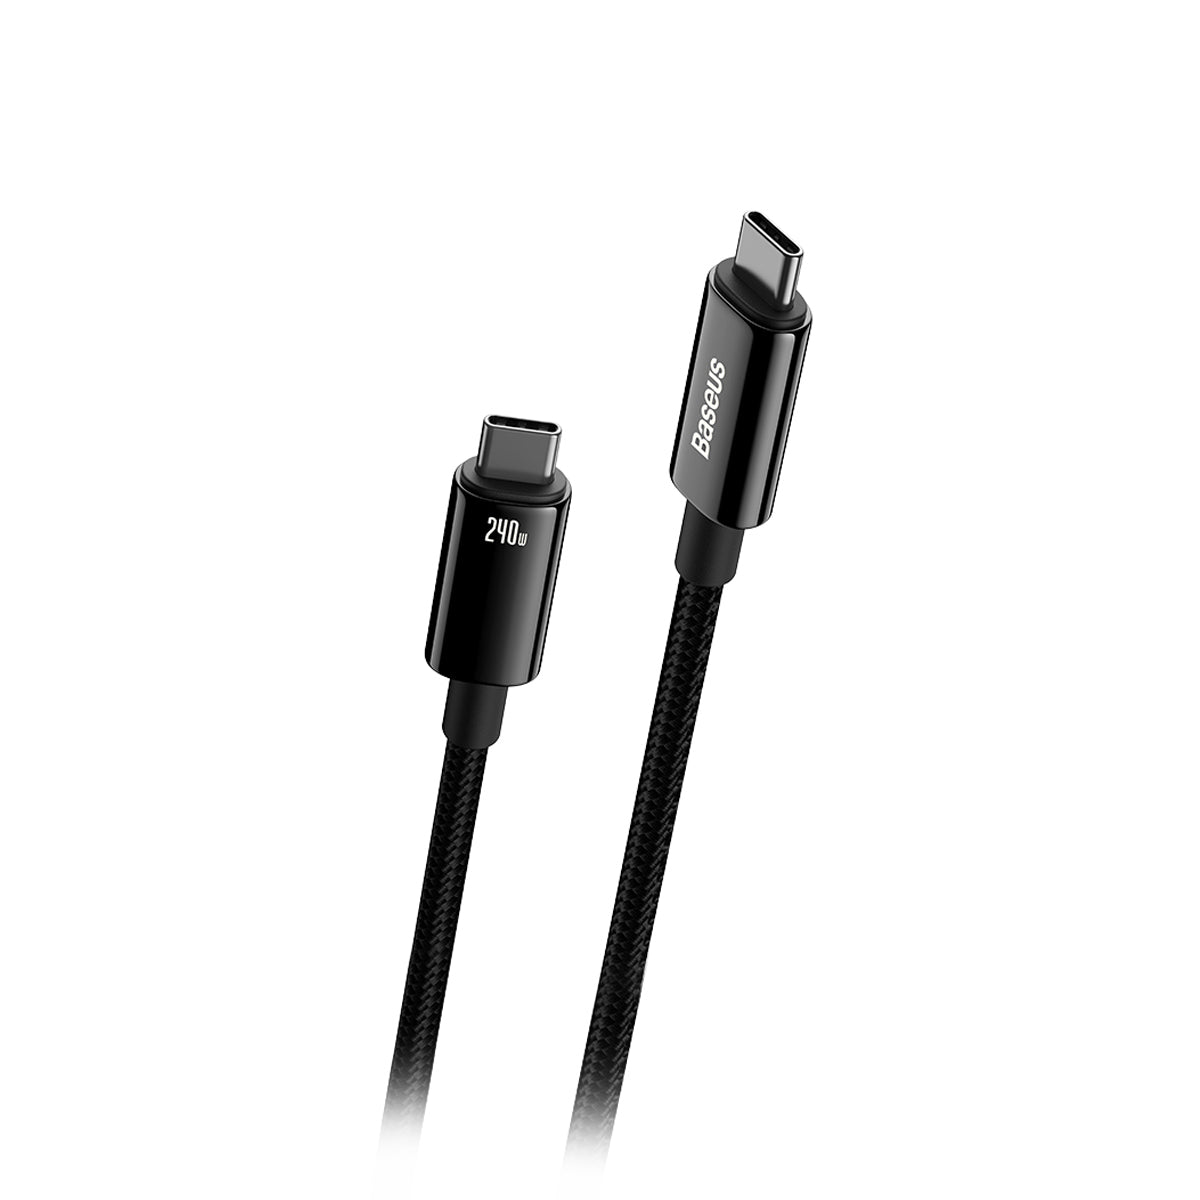 Baseus USB-C Charging Cable in 2 Meter